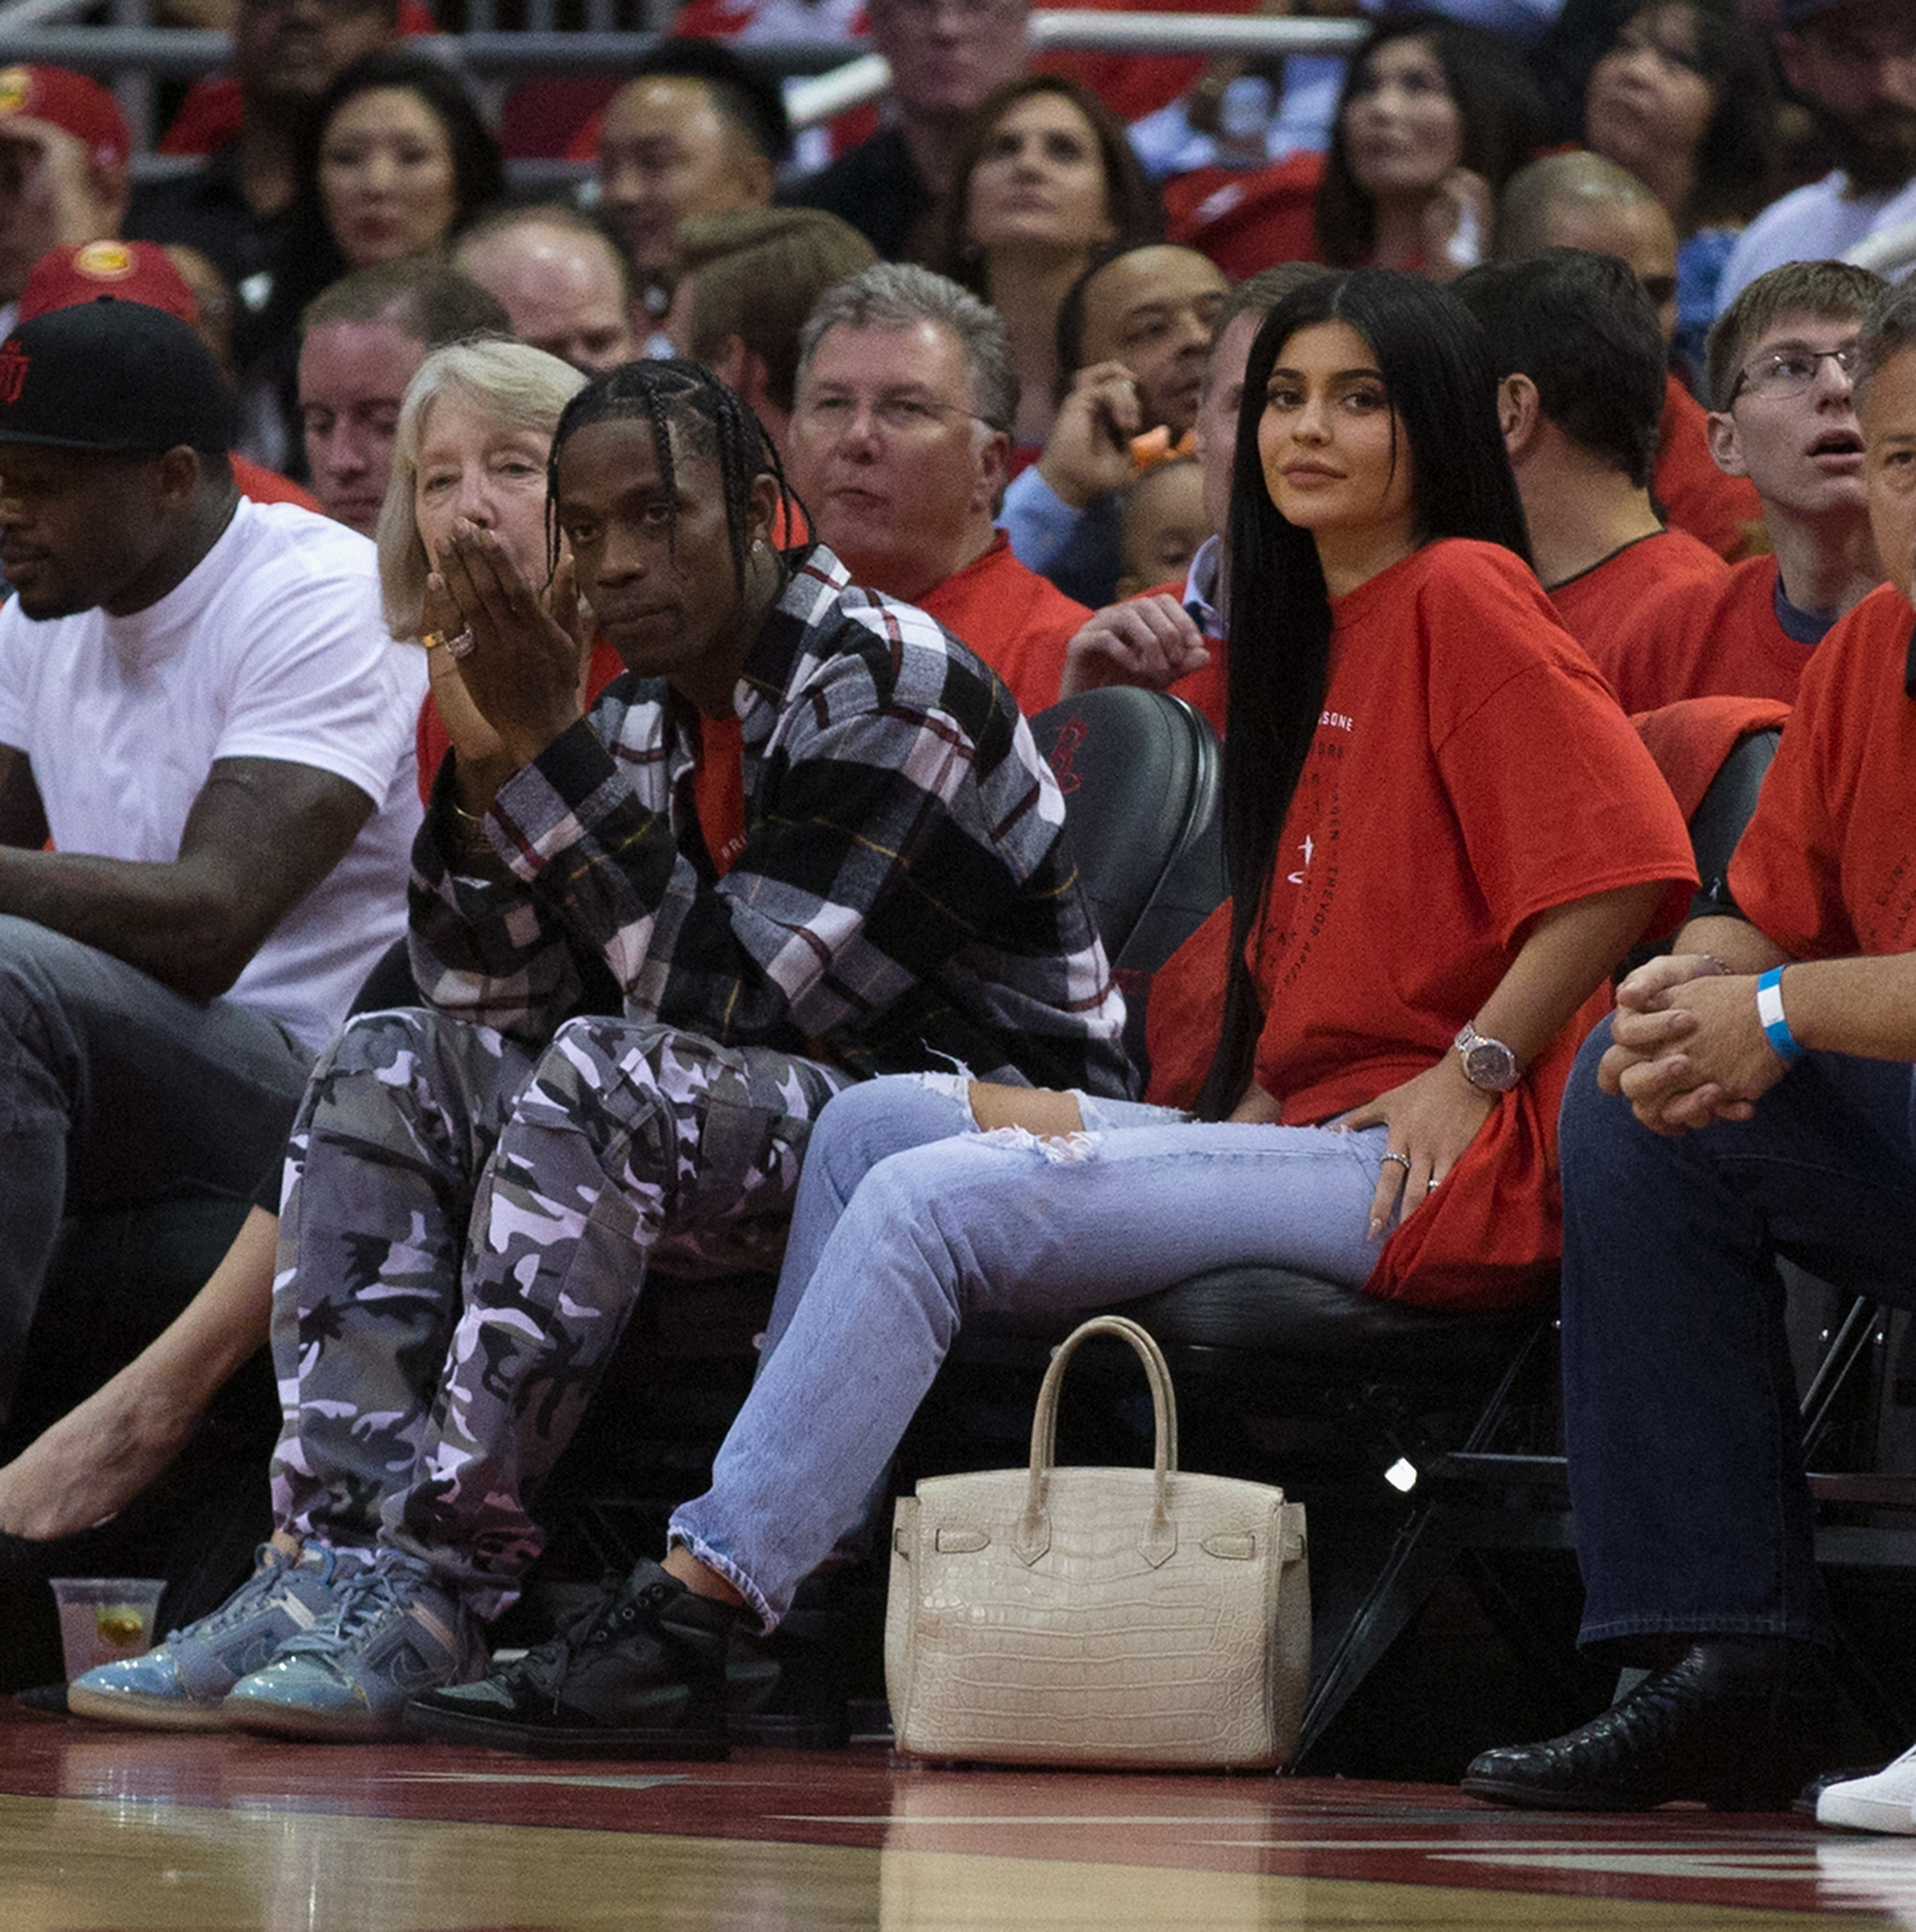 Kylie Jenner And Travis Scott's Girl Has A Crazy Sneaker Collection